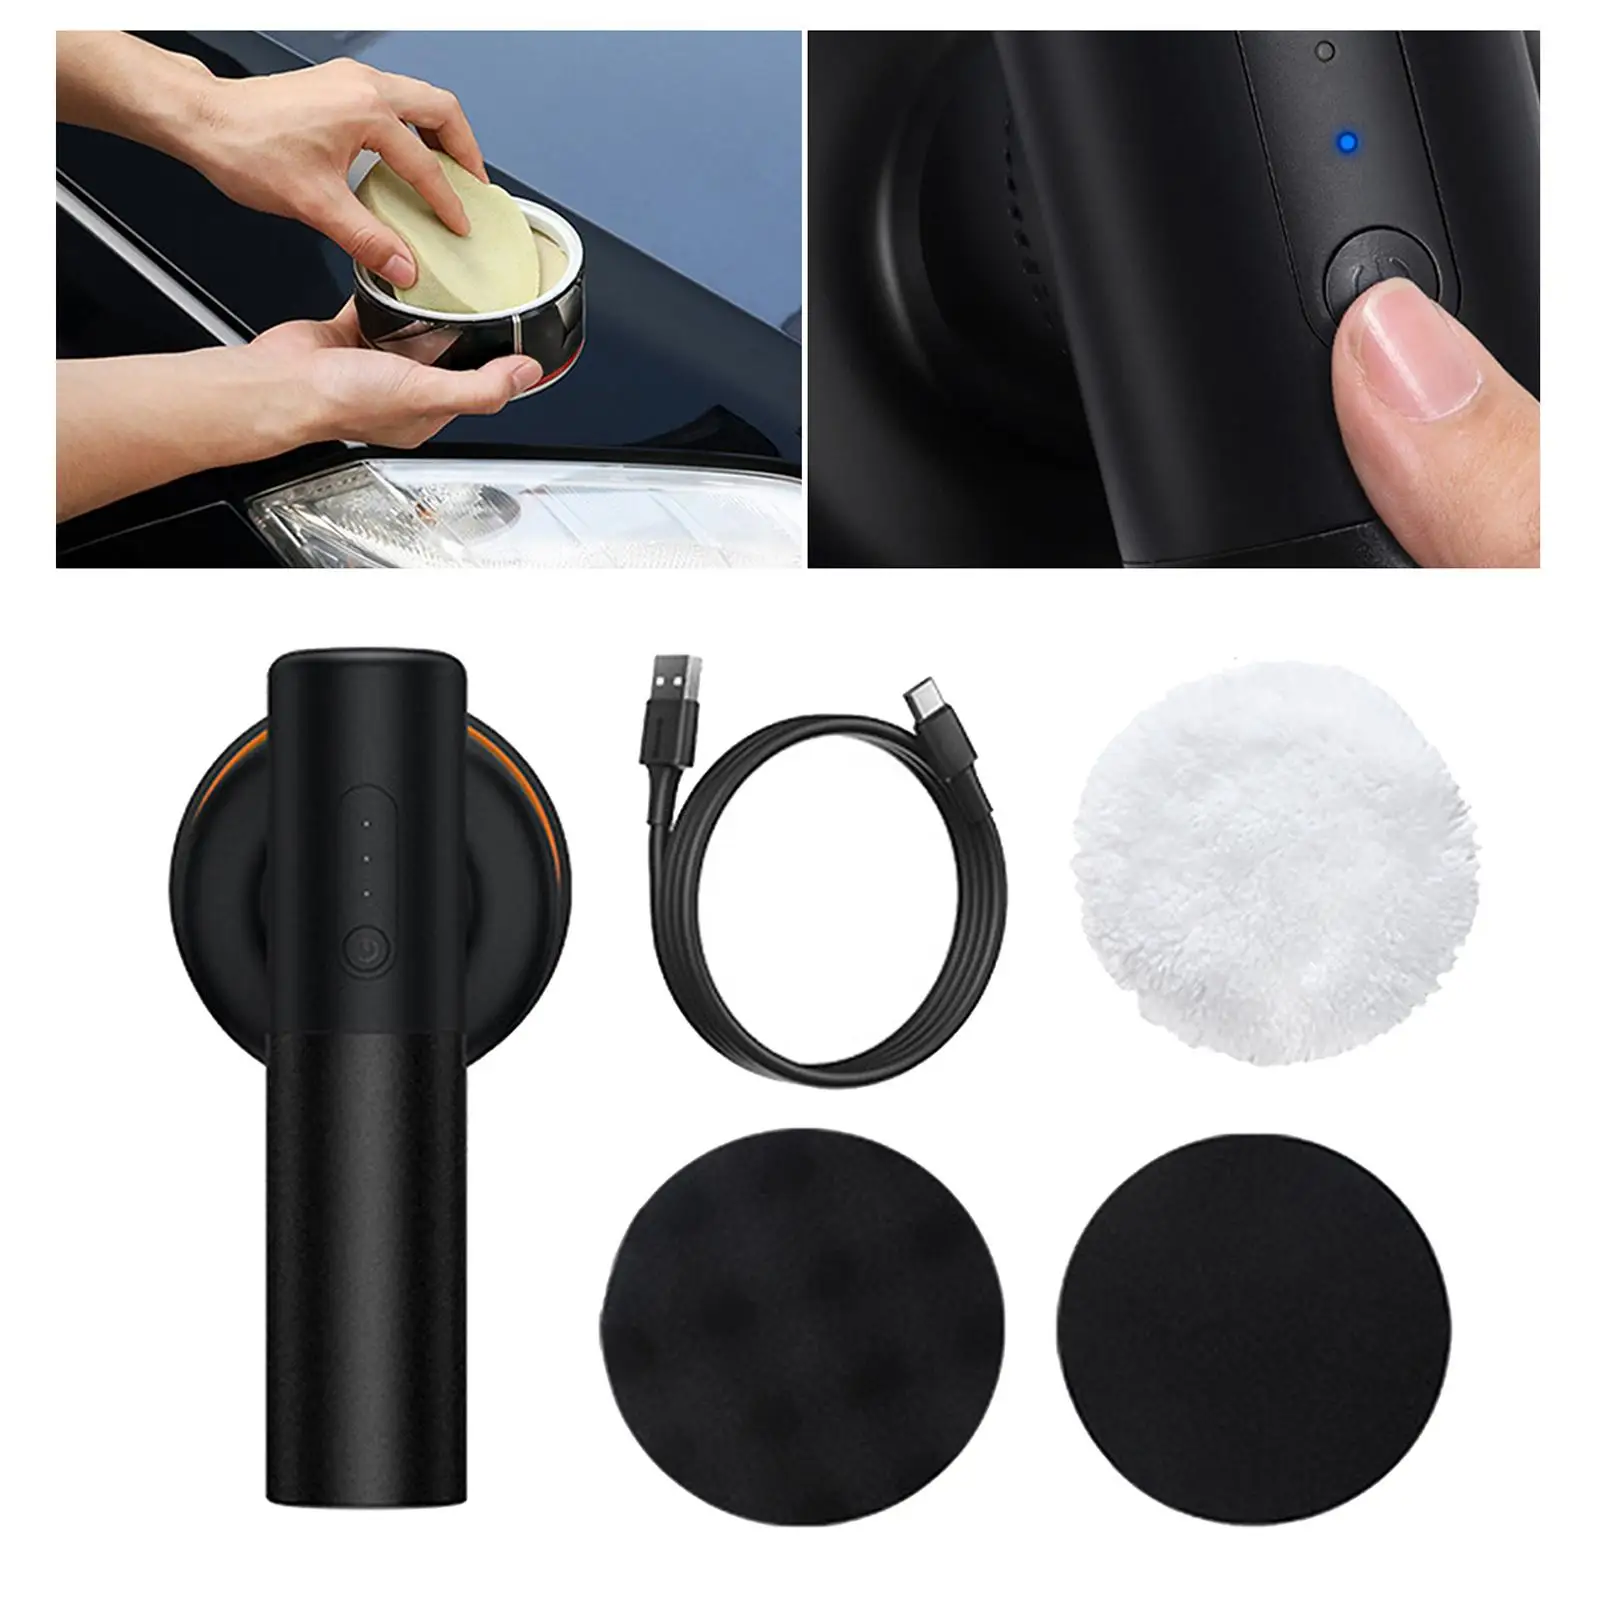 Car Electric Polisher Buffing W/ Pad Buffer for Car Detailing Fit for Furniture